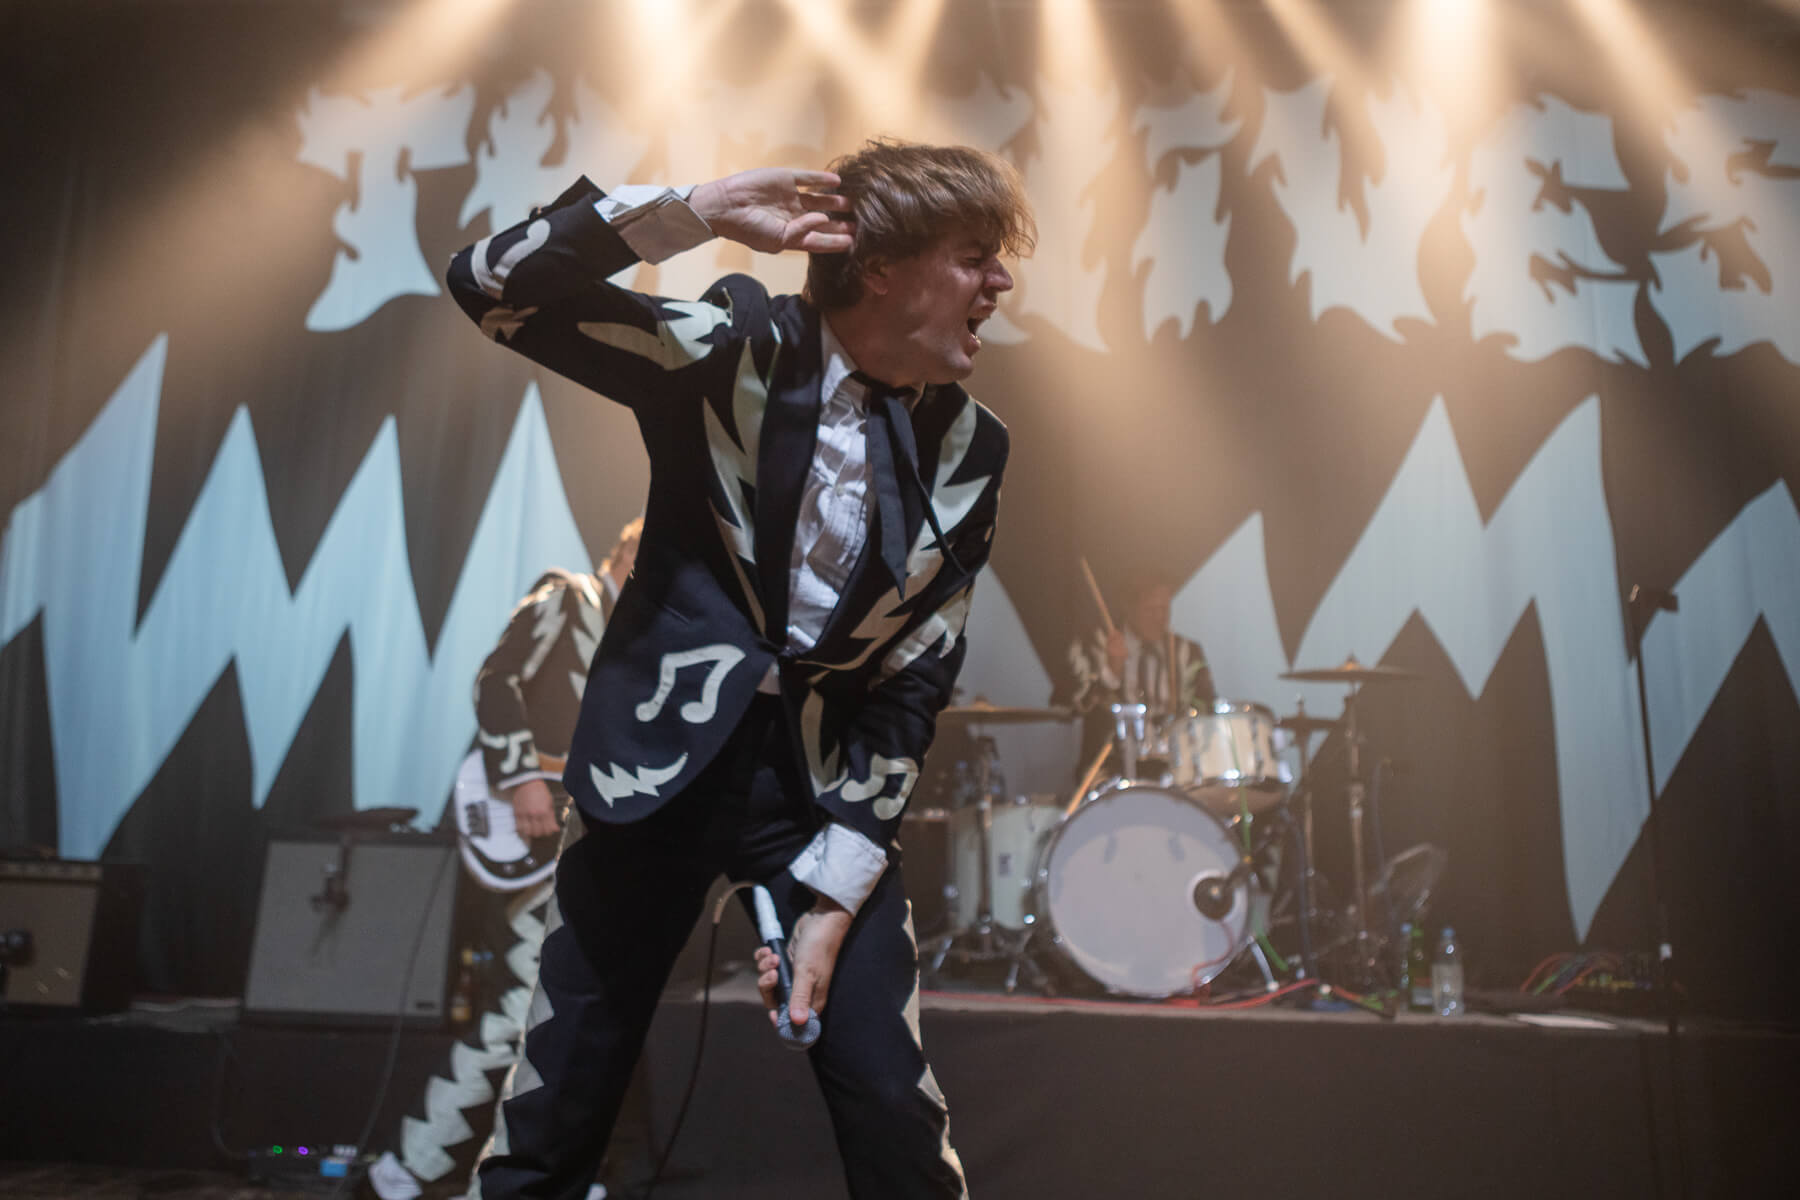 The Hives in Warsaw